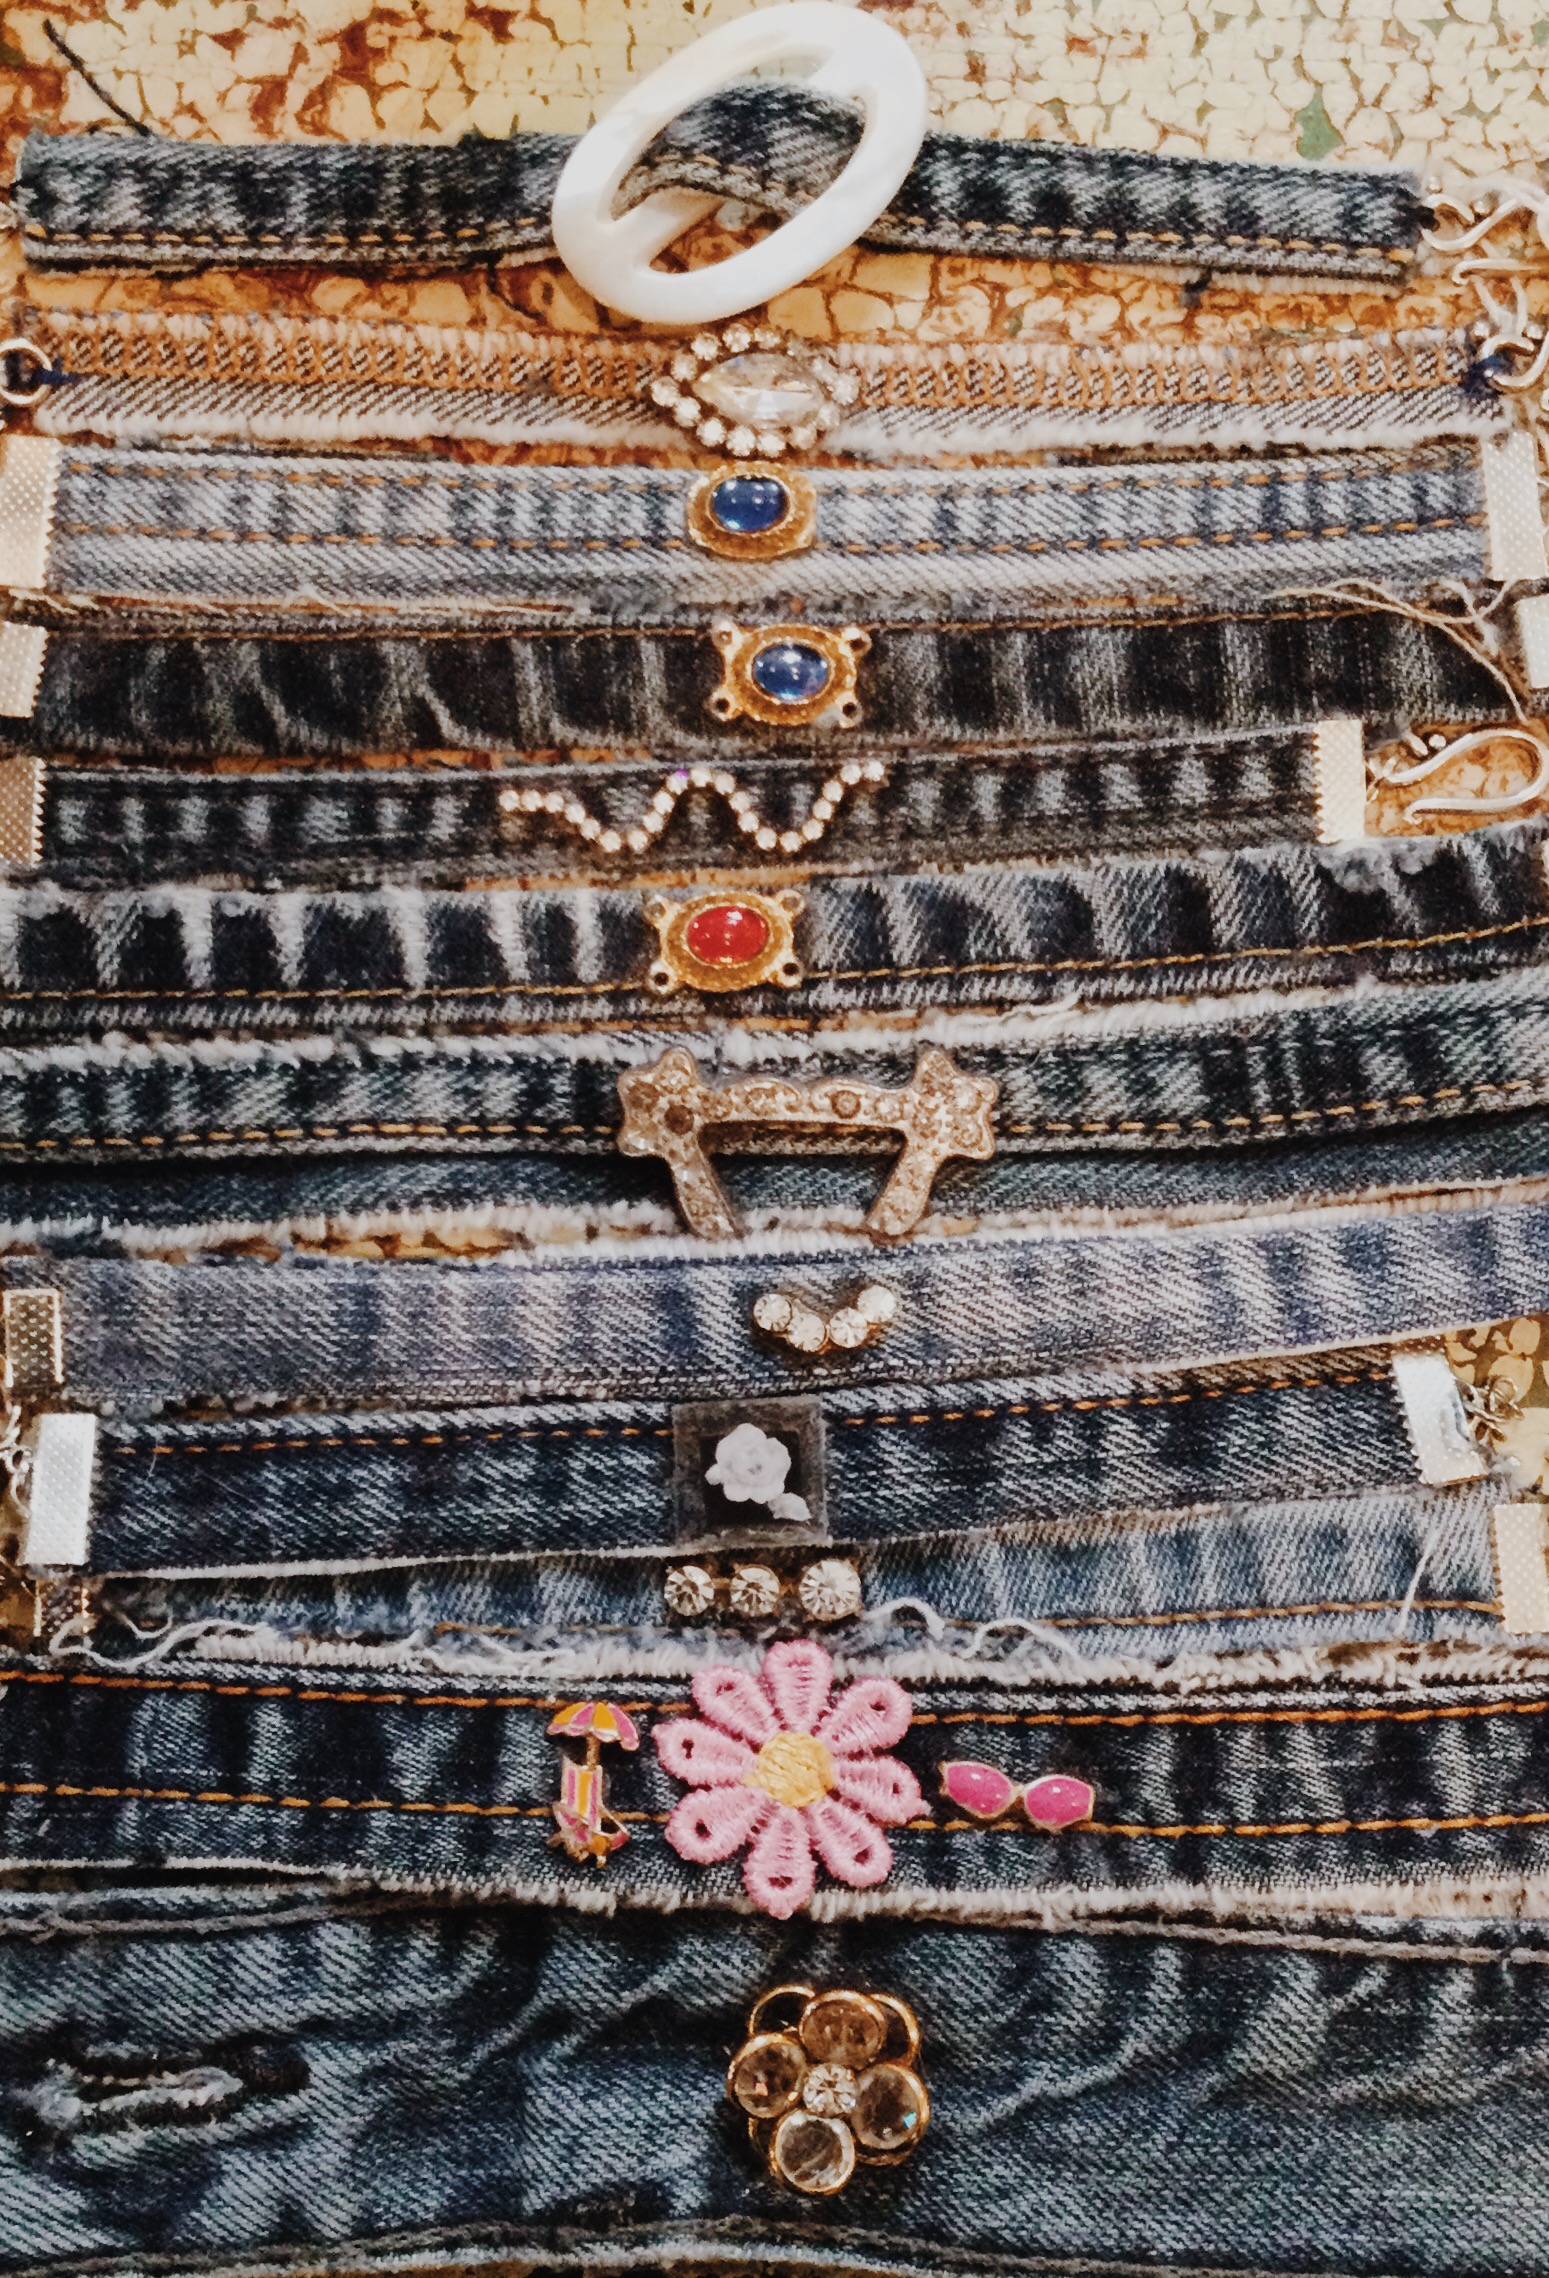 These blue jean Kelli Hawk Designs bracelets are adorable and one of a kind! Please select the number that matches your bracelet choice!